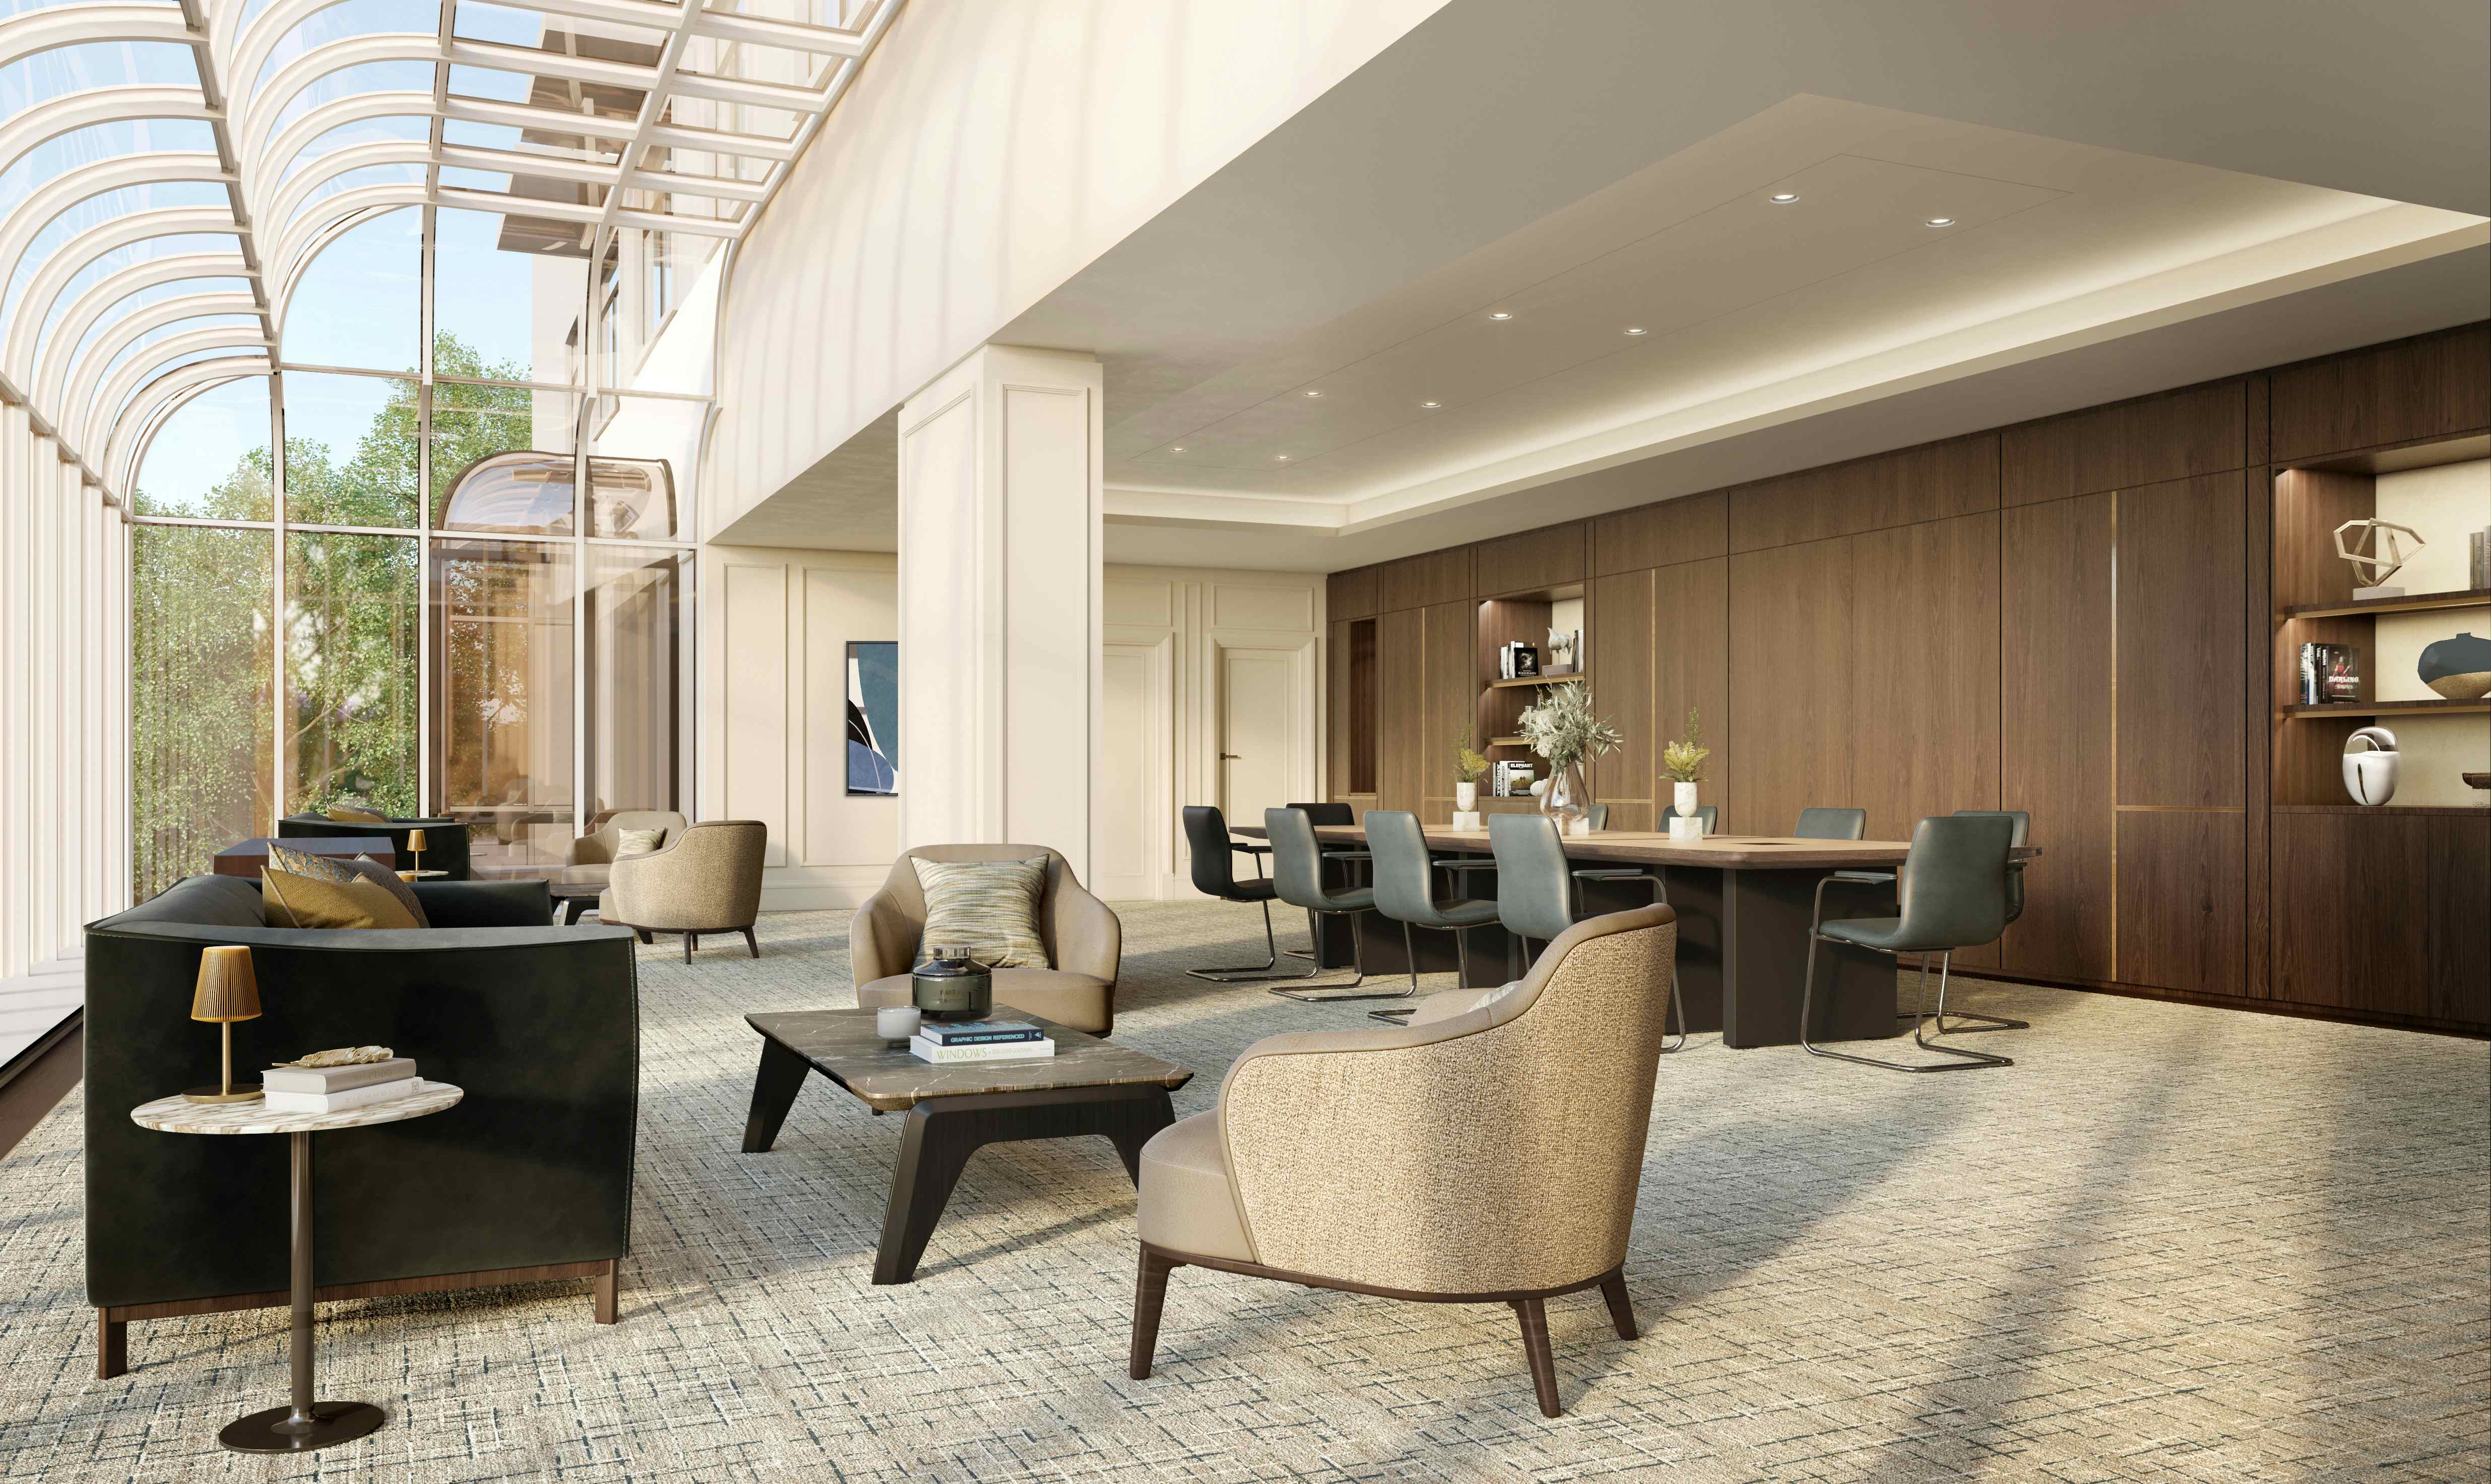 The Maple Room, The Carlton Tower Jumeirah - Opens 1st June 2021